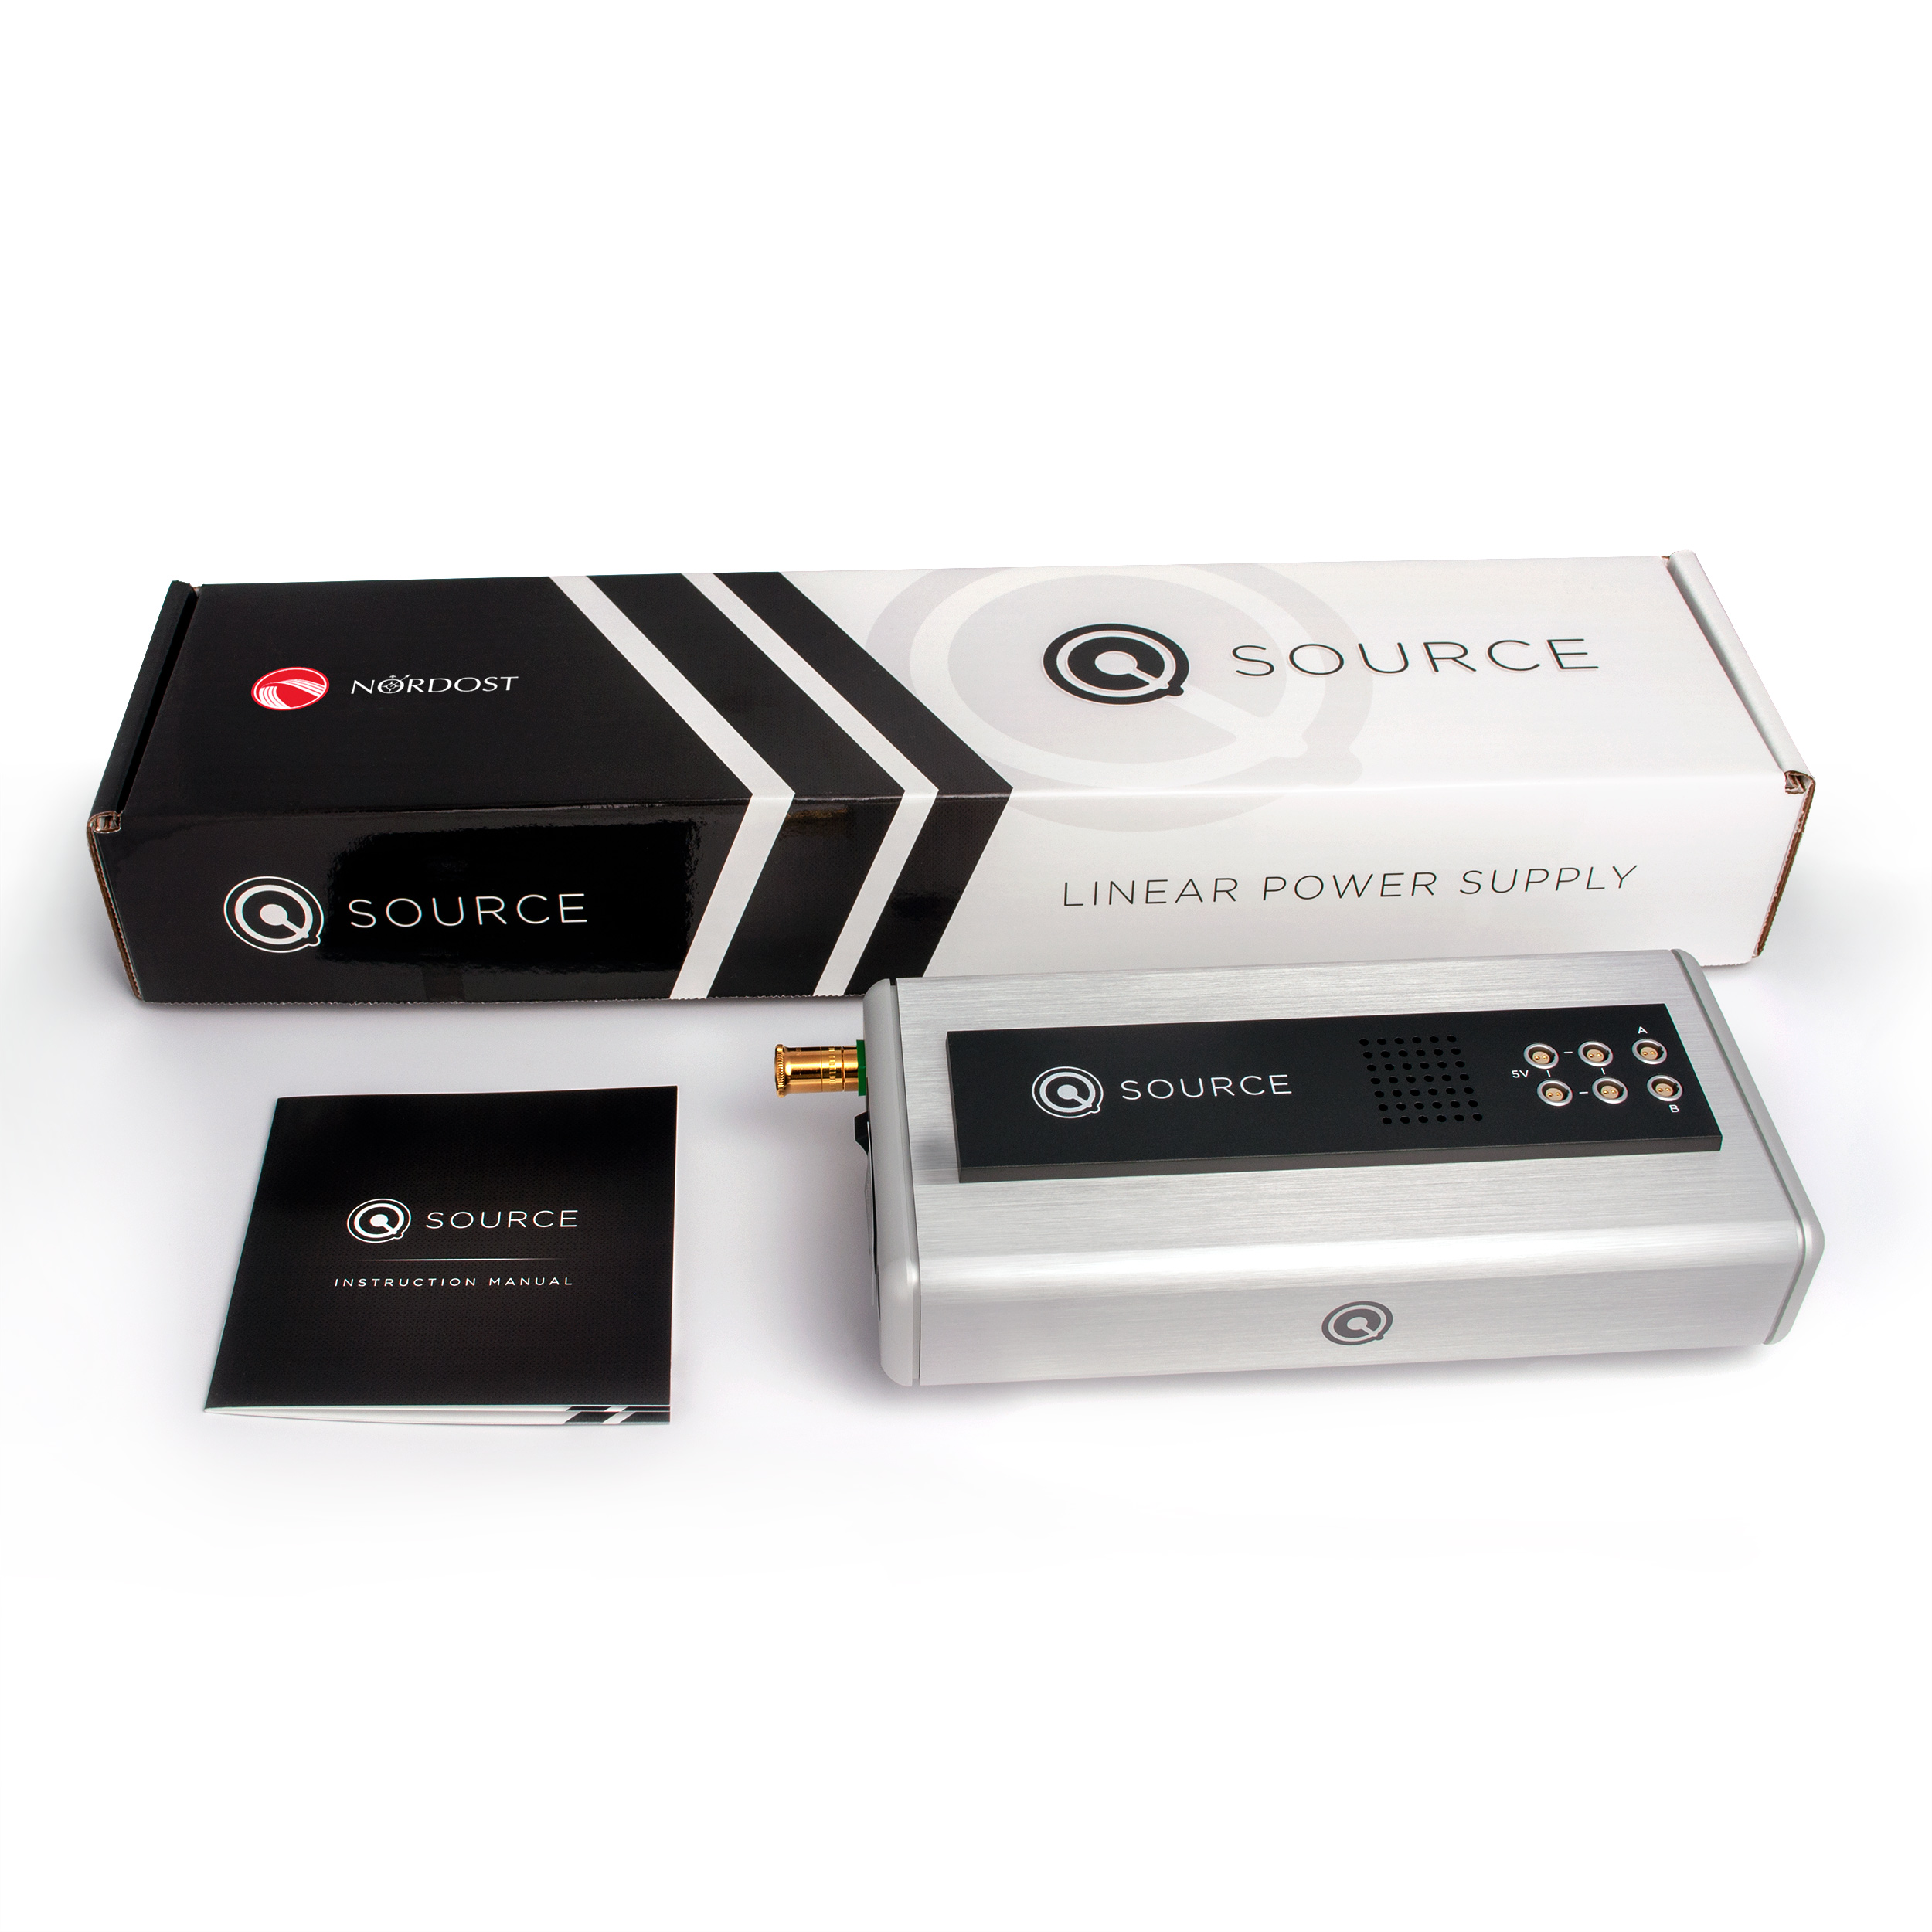 <p align="center">QSOURCE With Packaging